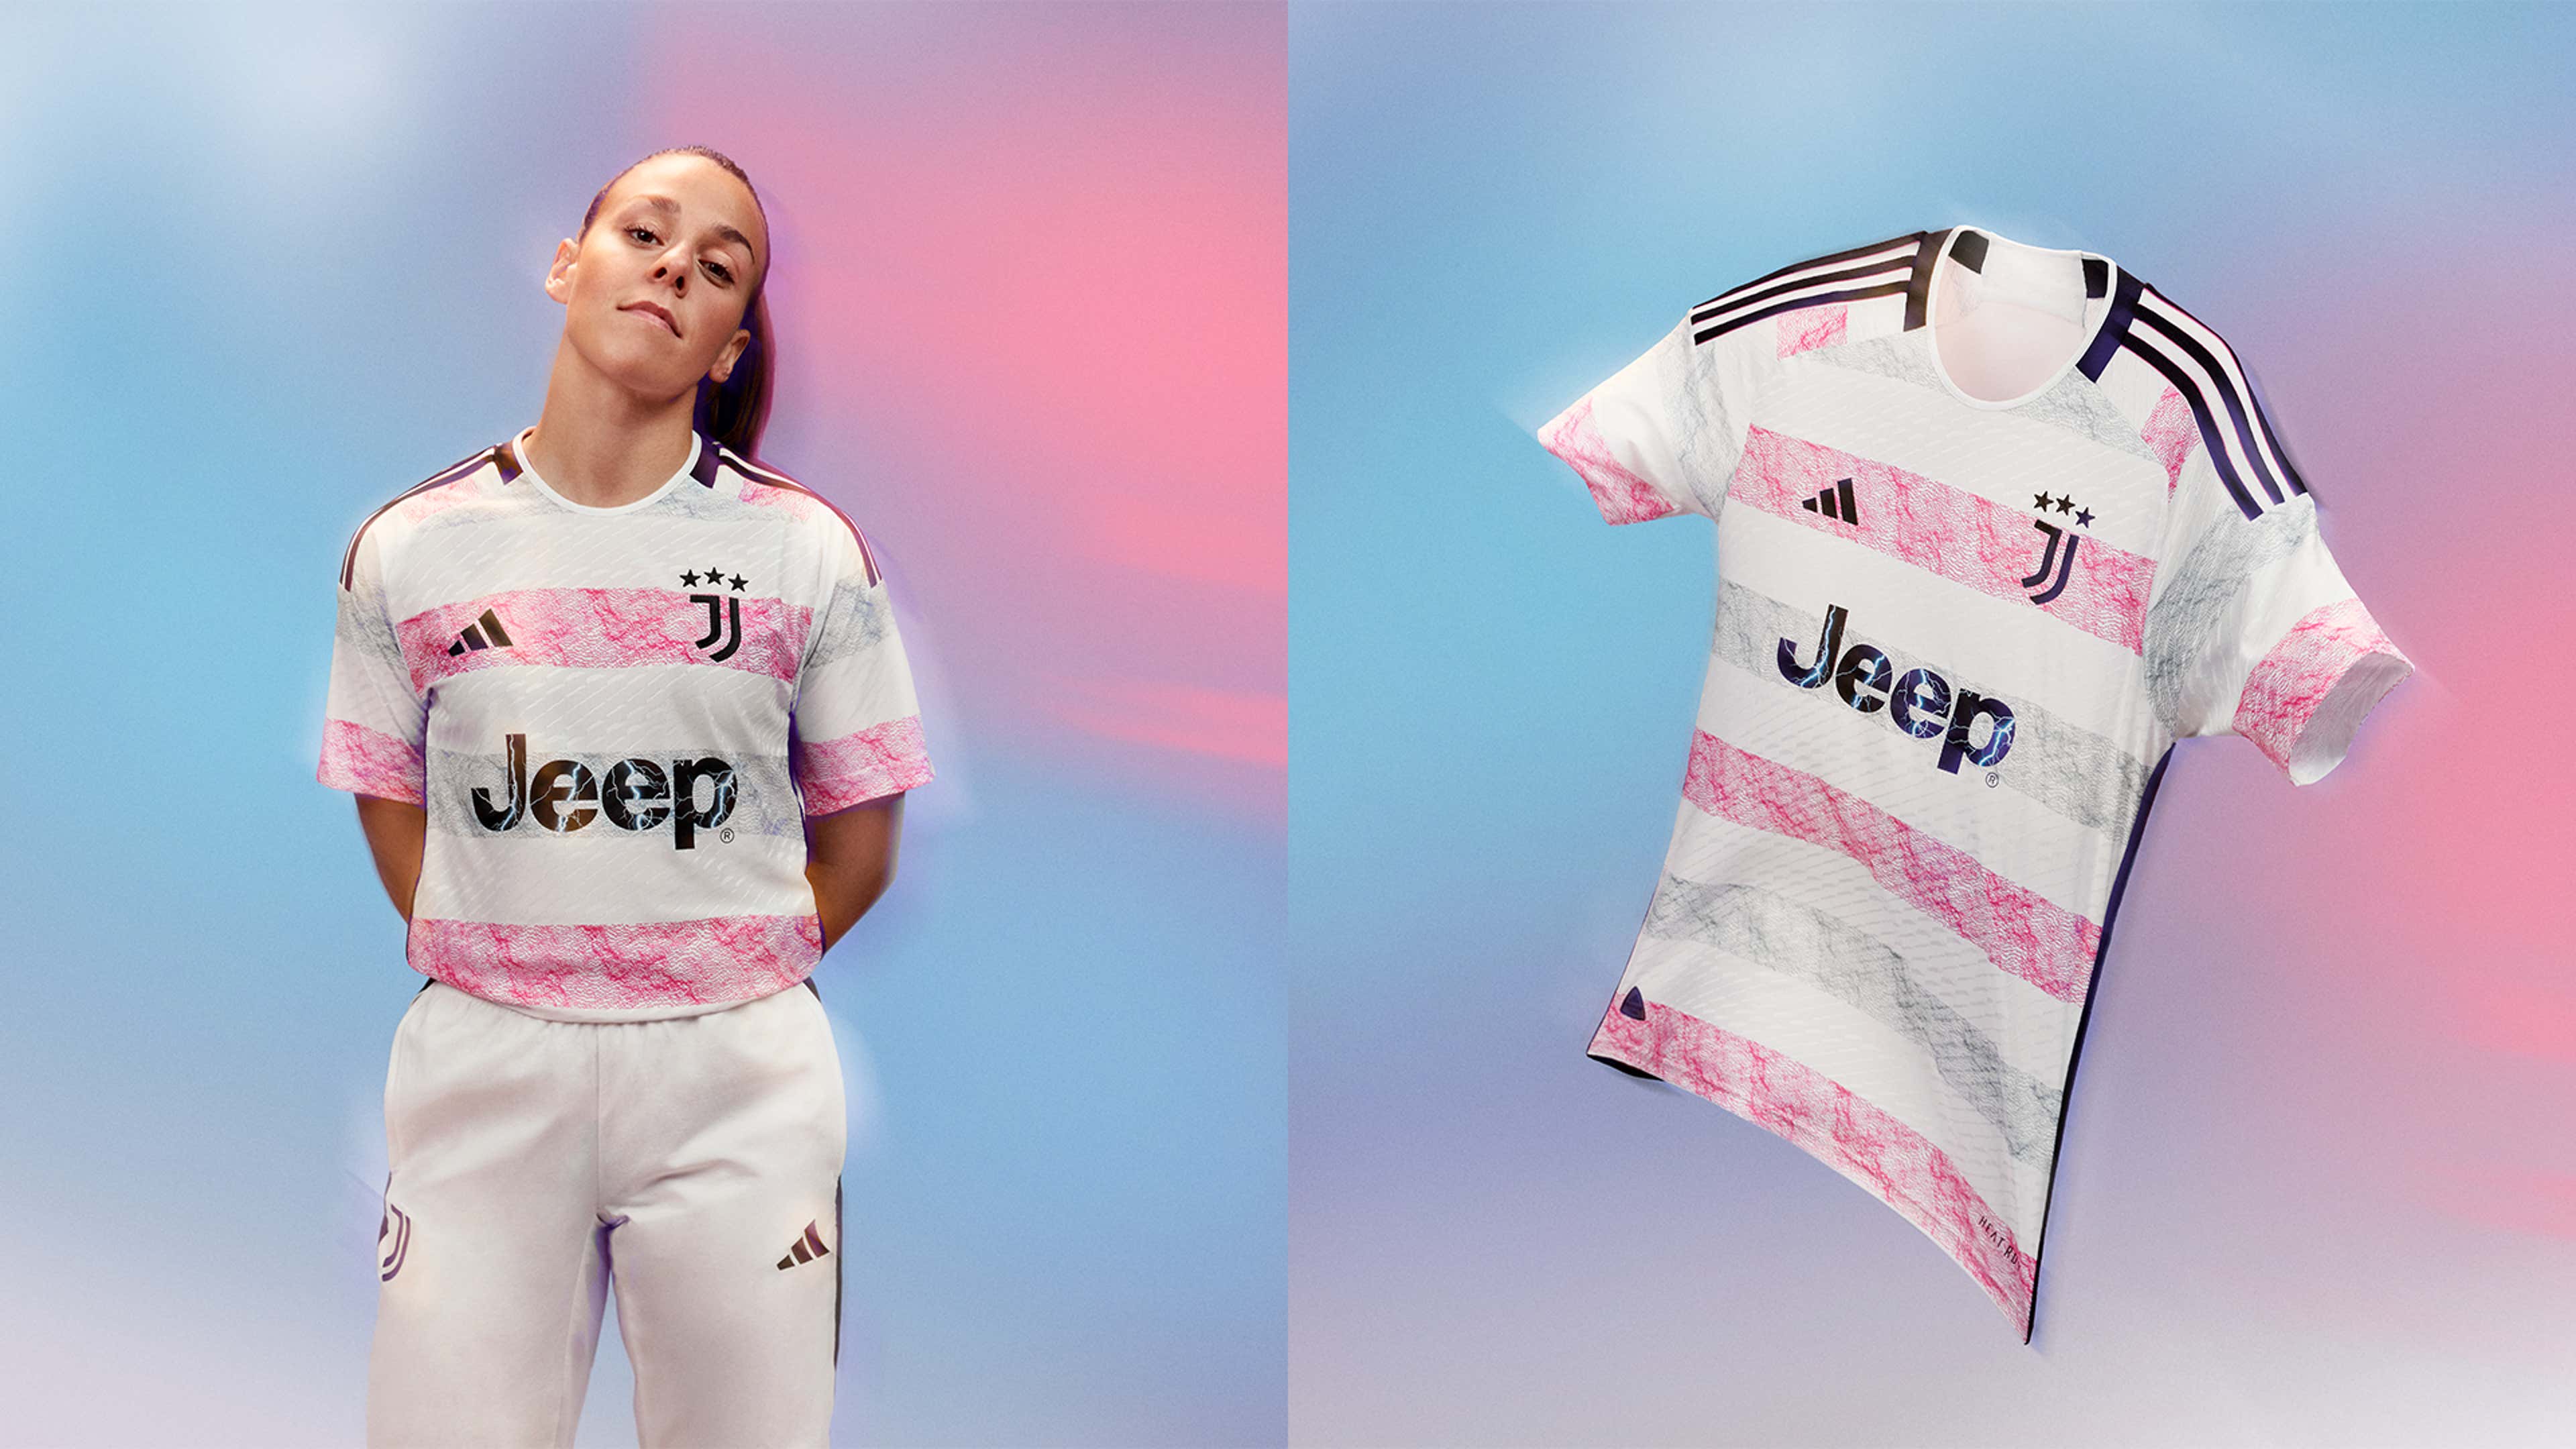 5 Football Kits That Are Already Making 2023/24 Look Exciting